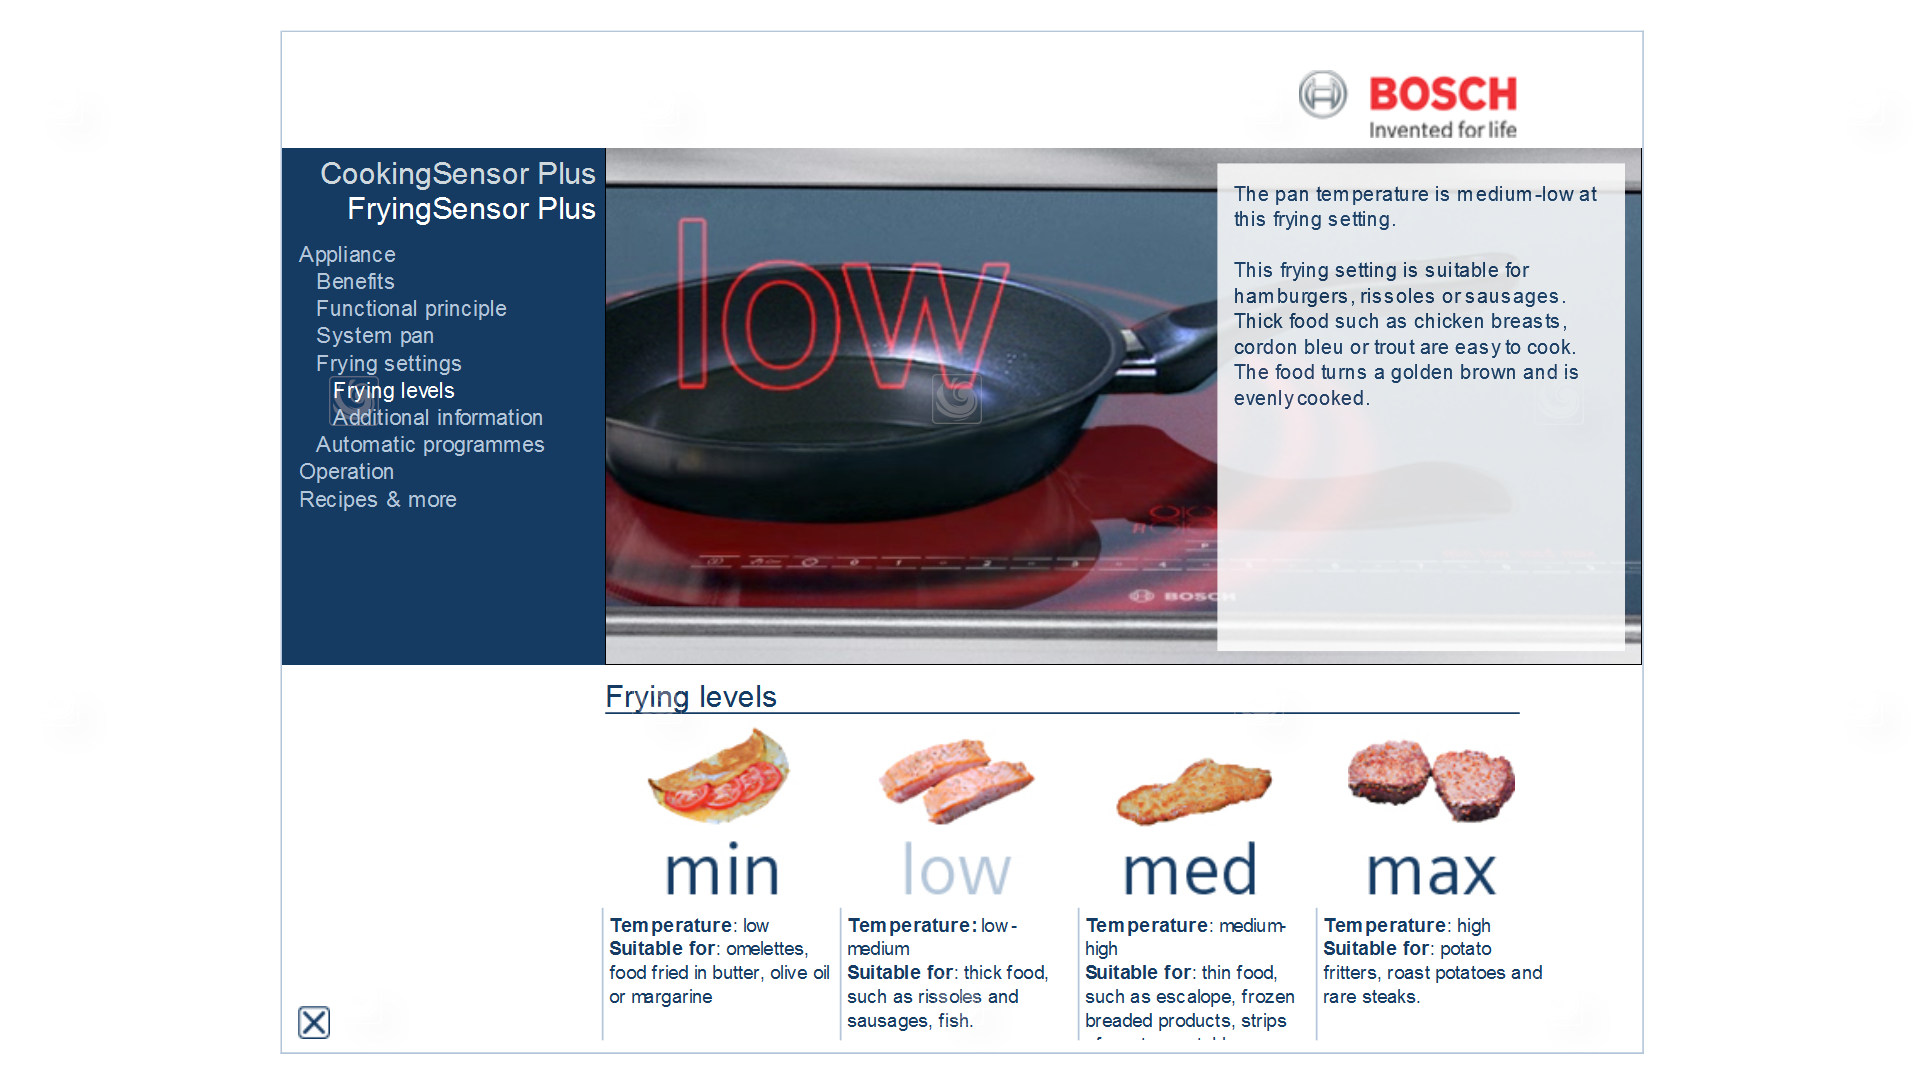 Bosch's web application screenshot showing different frying levels of its induction cooktops